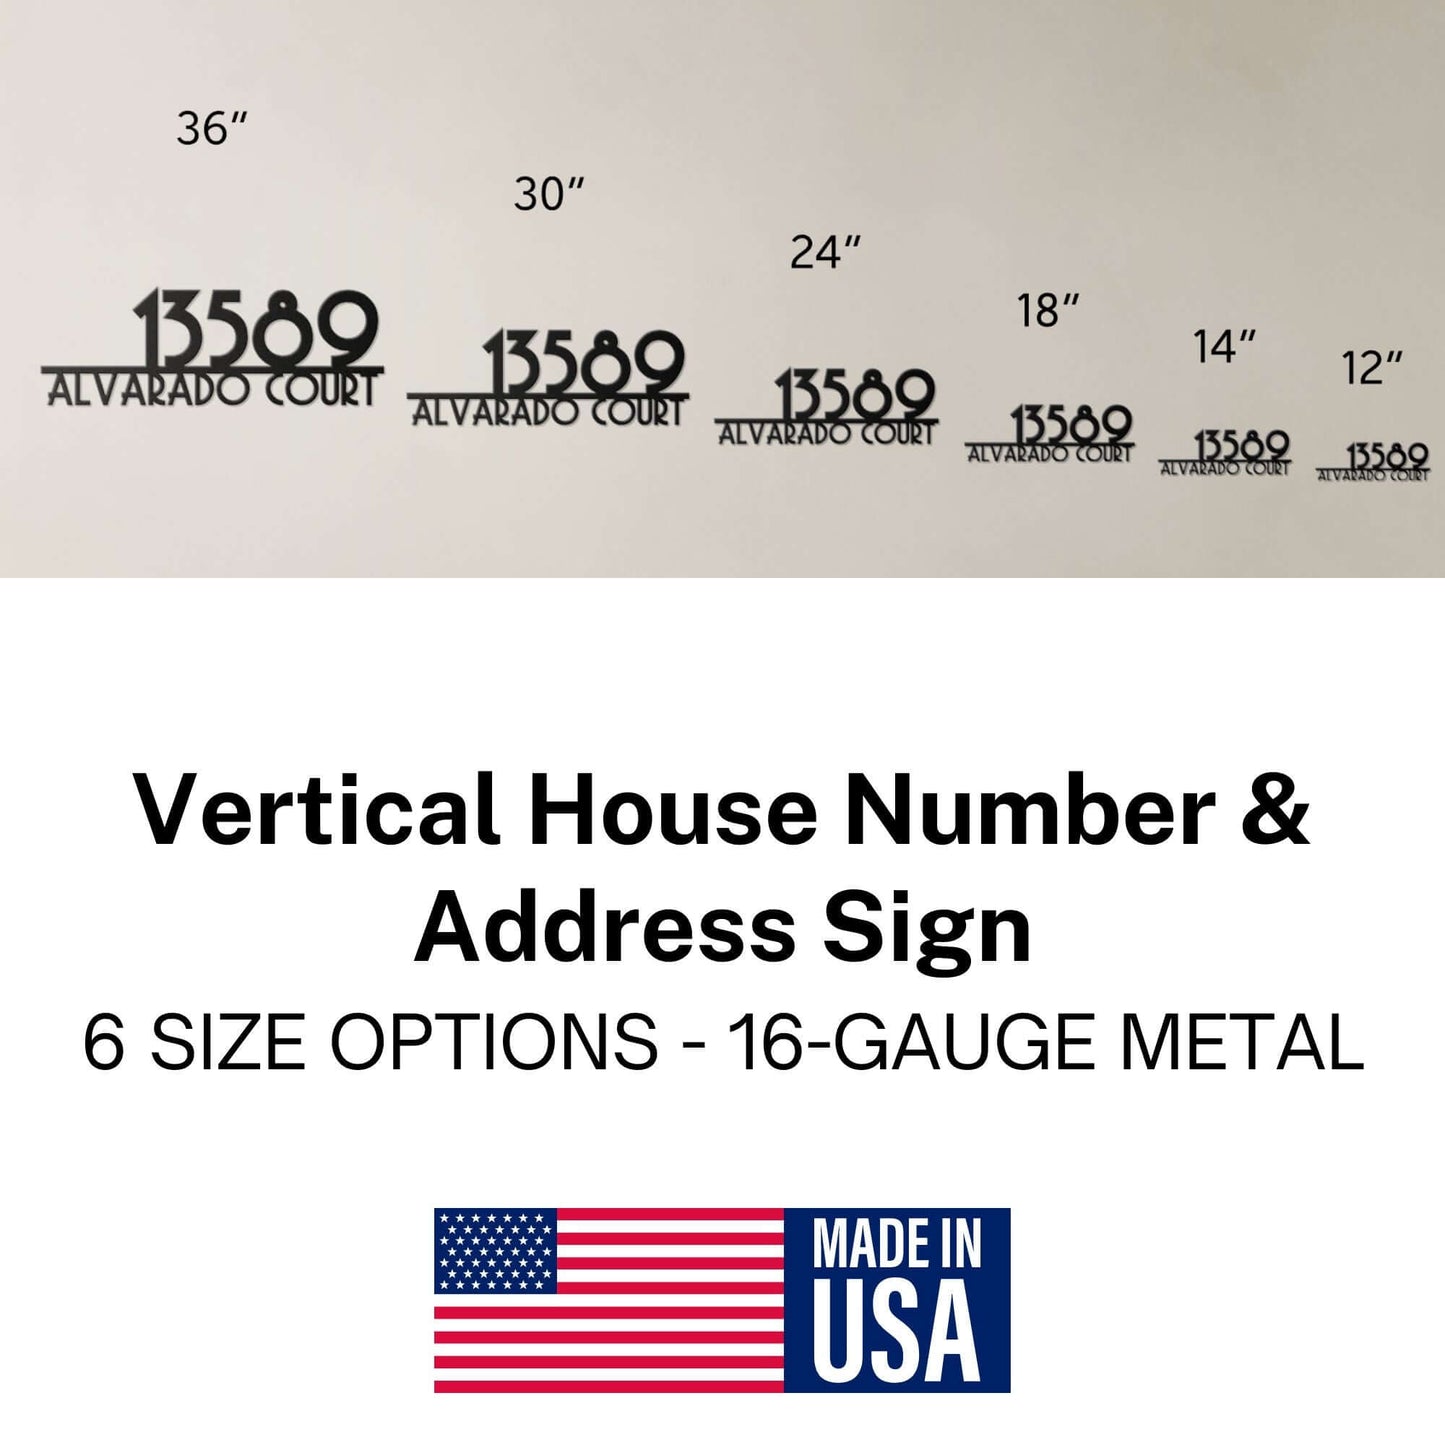 Mid-Century Modern Deco Metal House Number & Address Sign